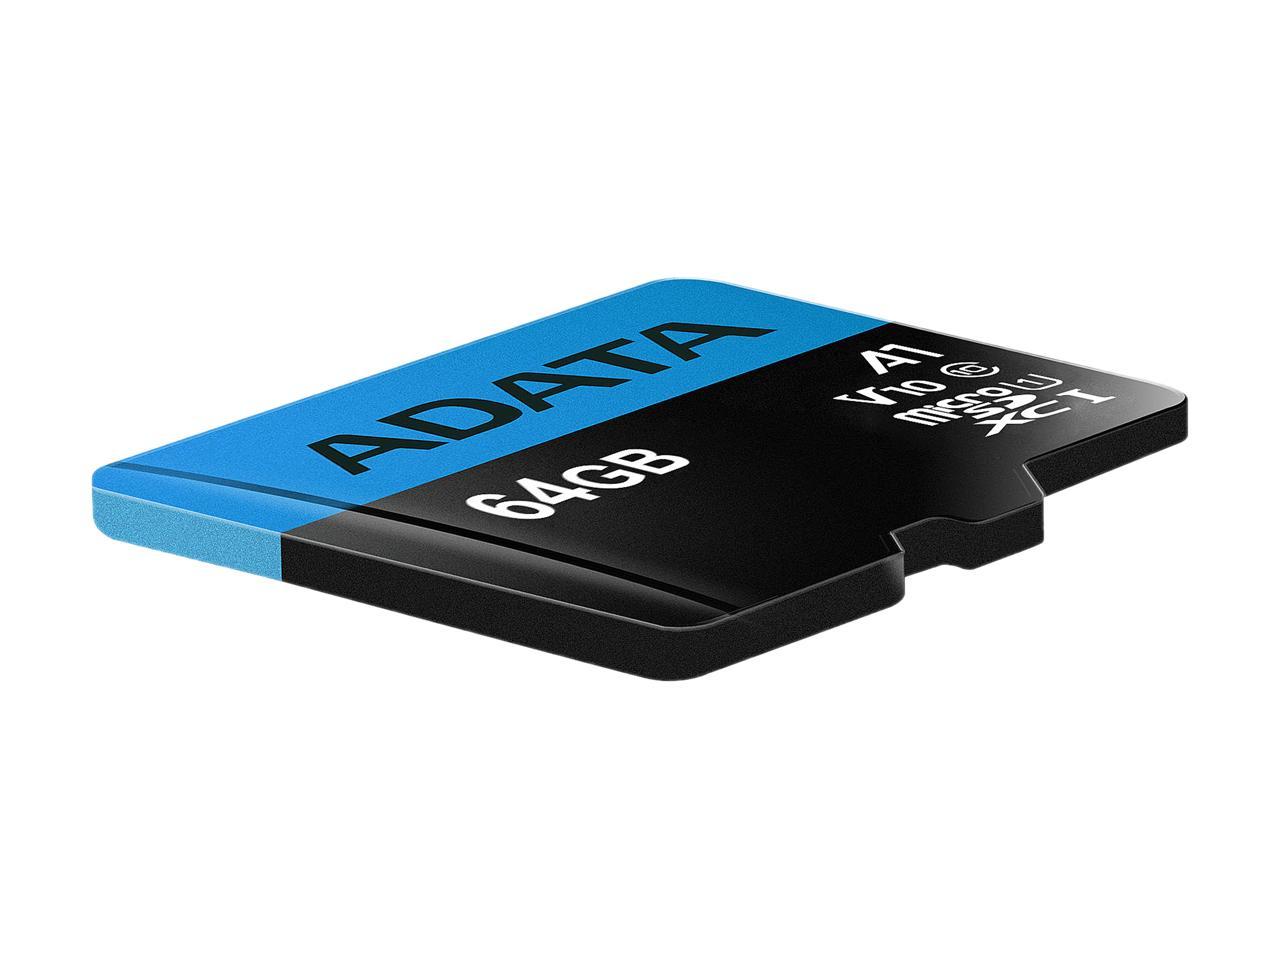 ADATA 64GB Premier microSDXC UHS-I / Class 10 V10 A1 Memory Card with SD Adapter - image 2 of 4